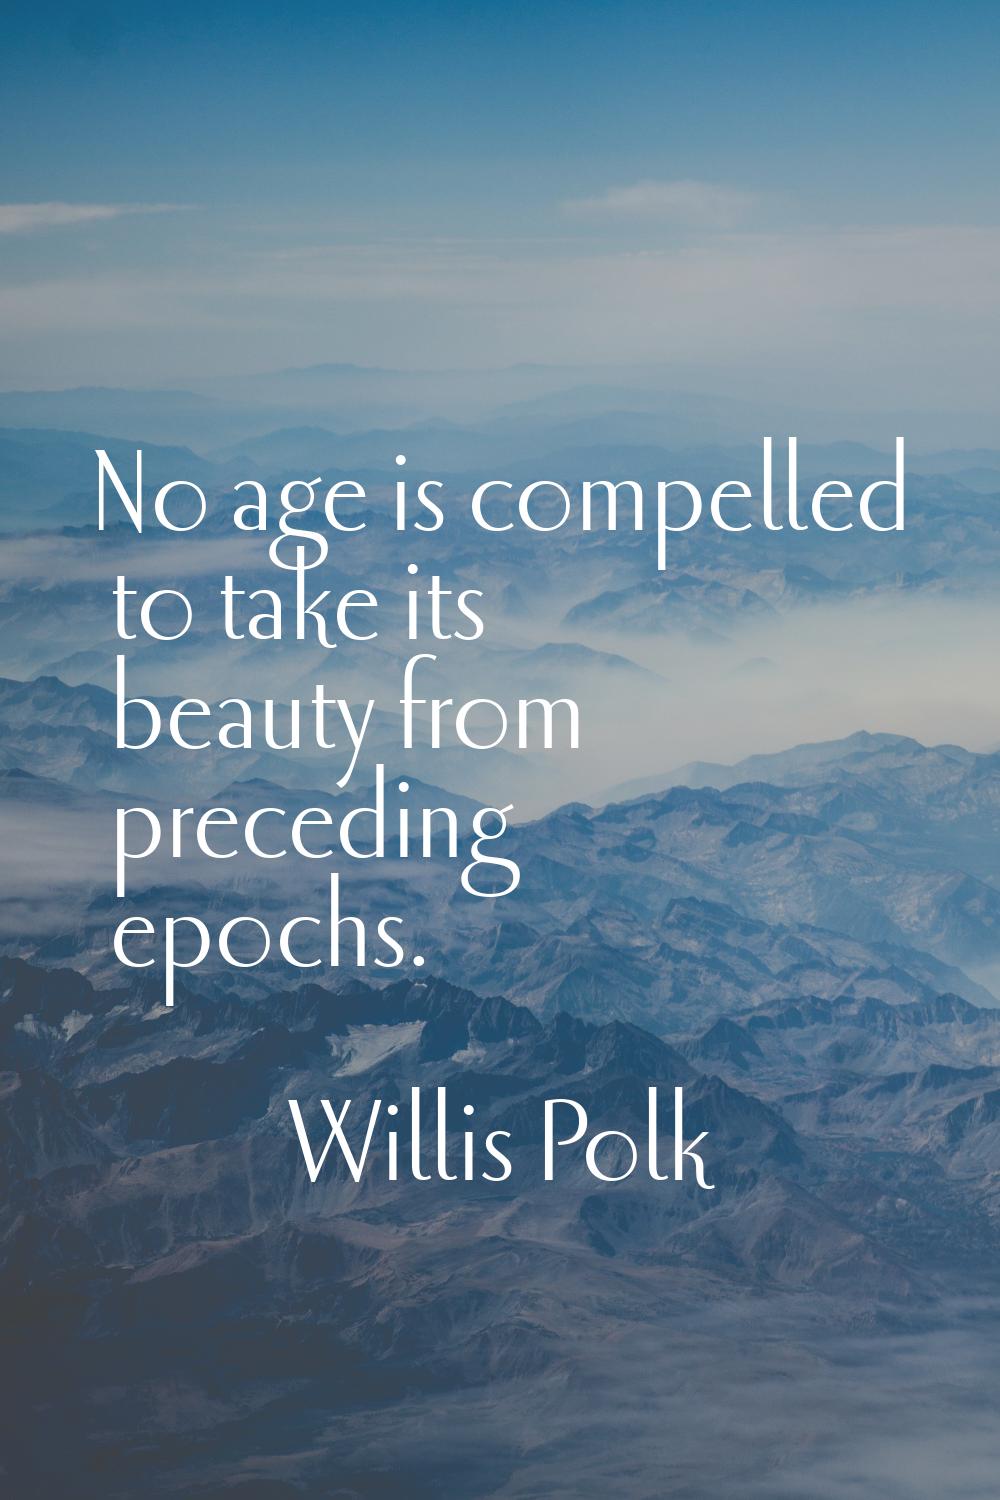 No age is compelled to take its beauty from preceding epochs.